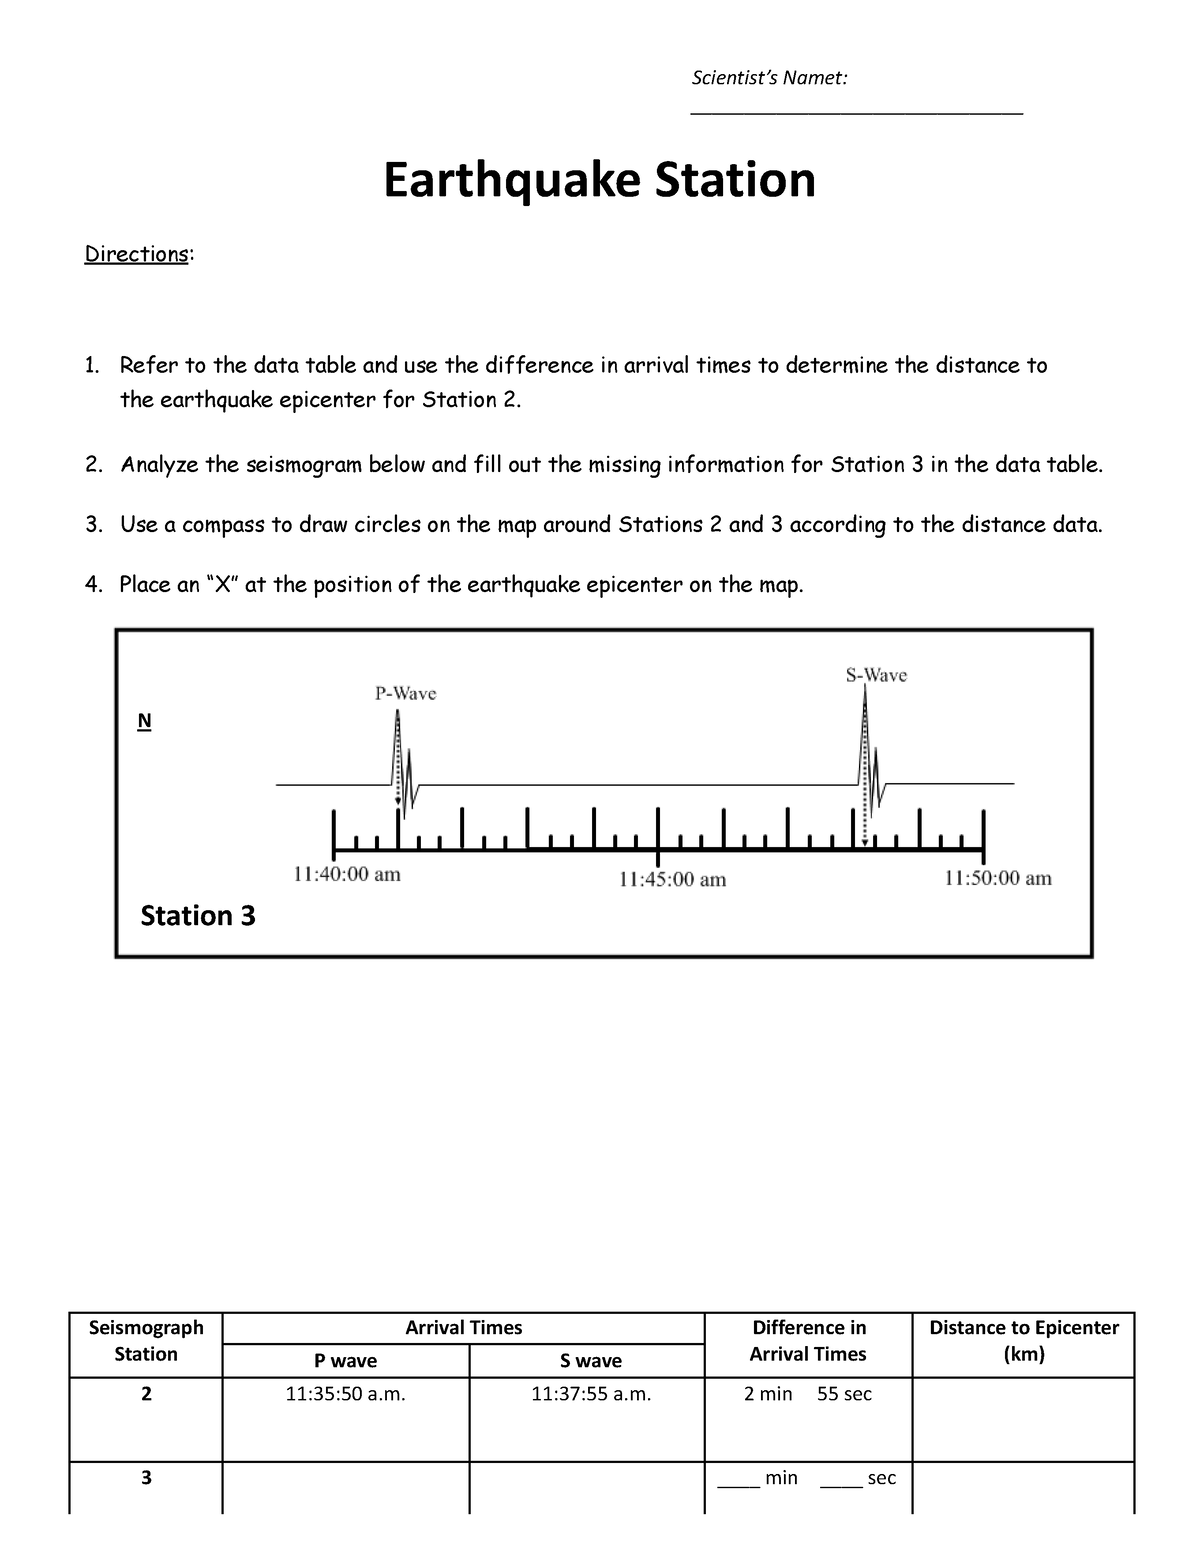 Zlab triangulation earthquake epicenter regents earth science